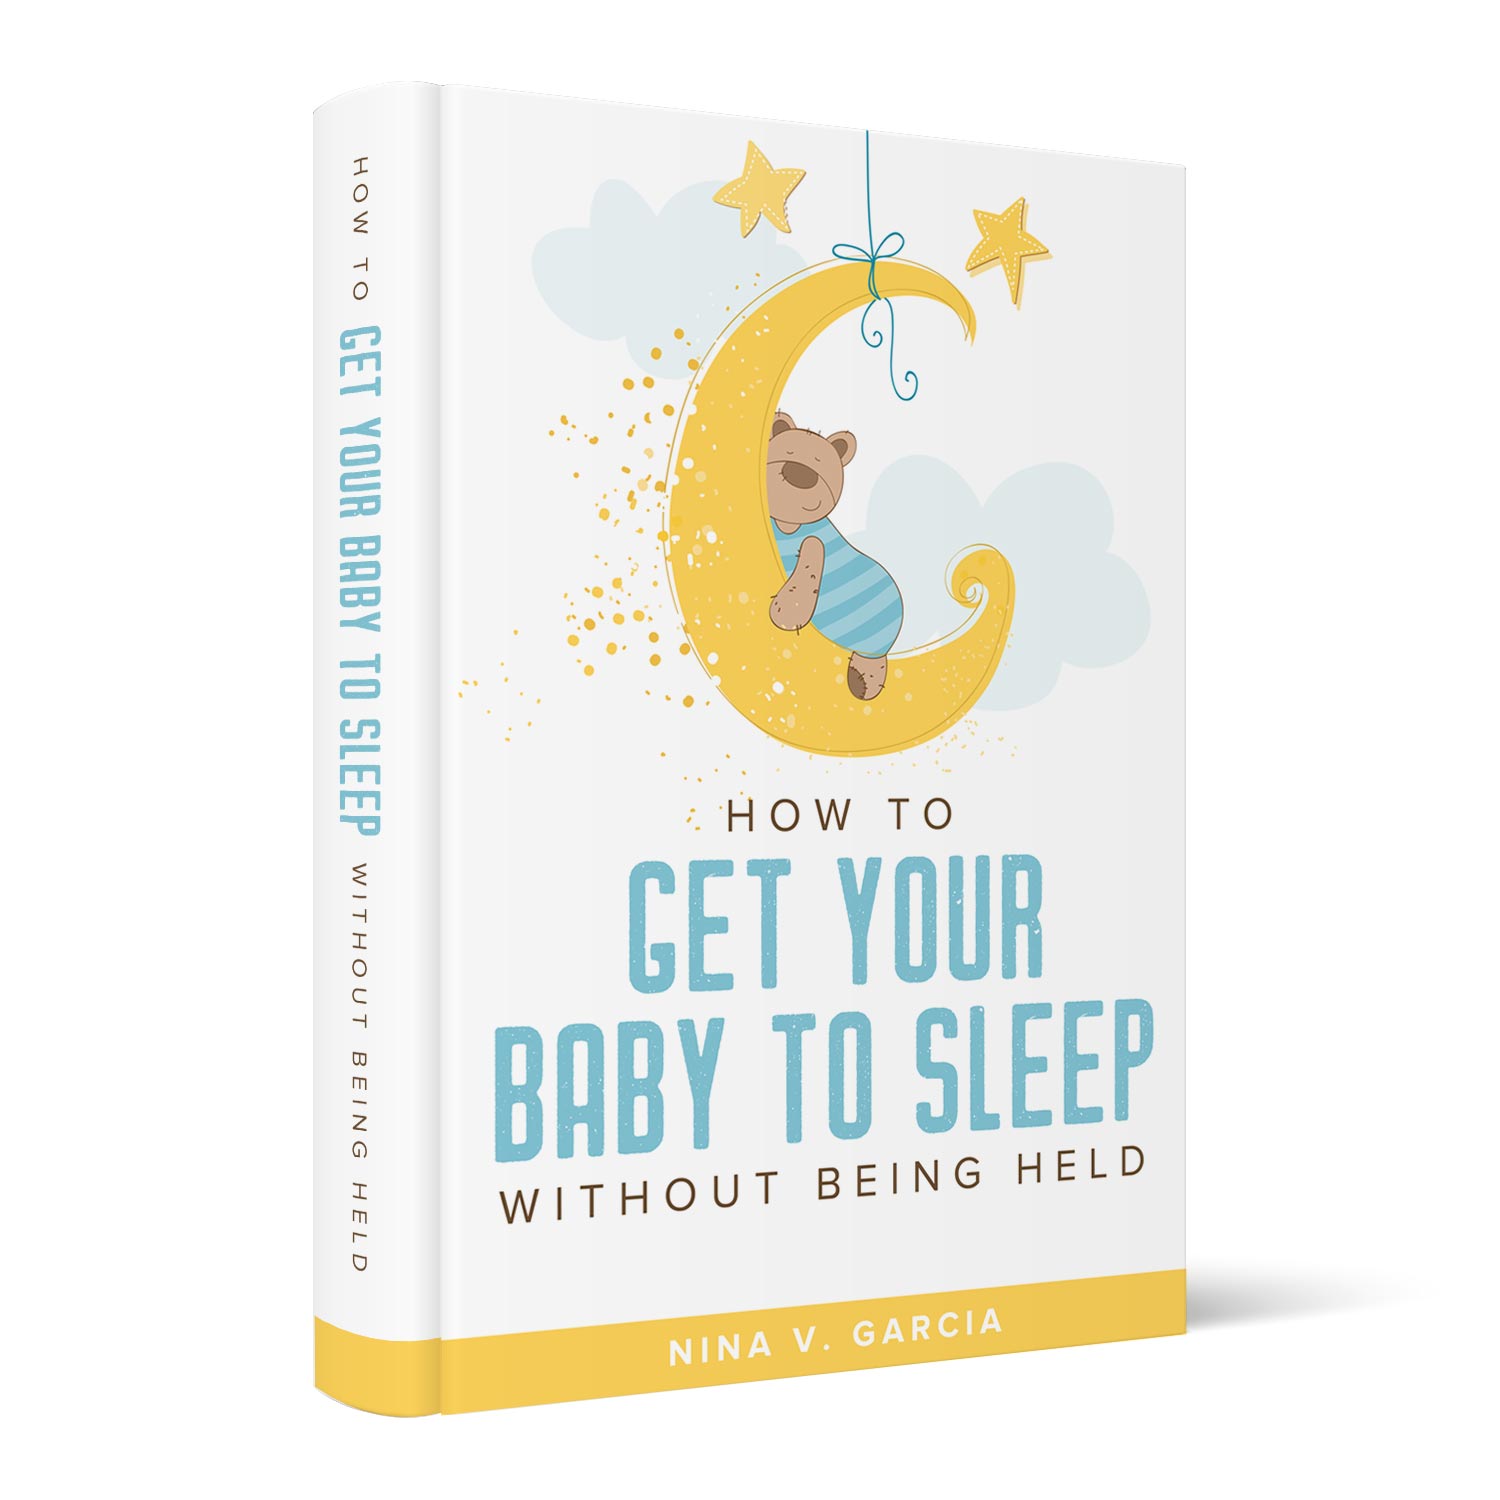 How to Get Your Baby to Sleep without Being Held